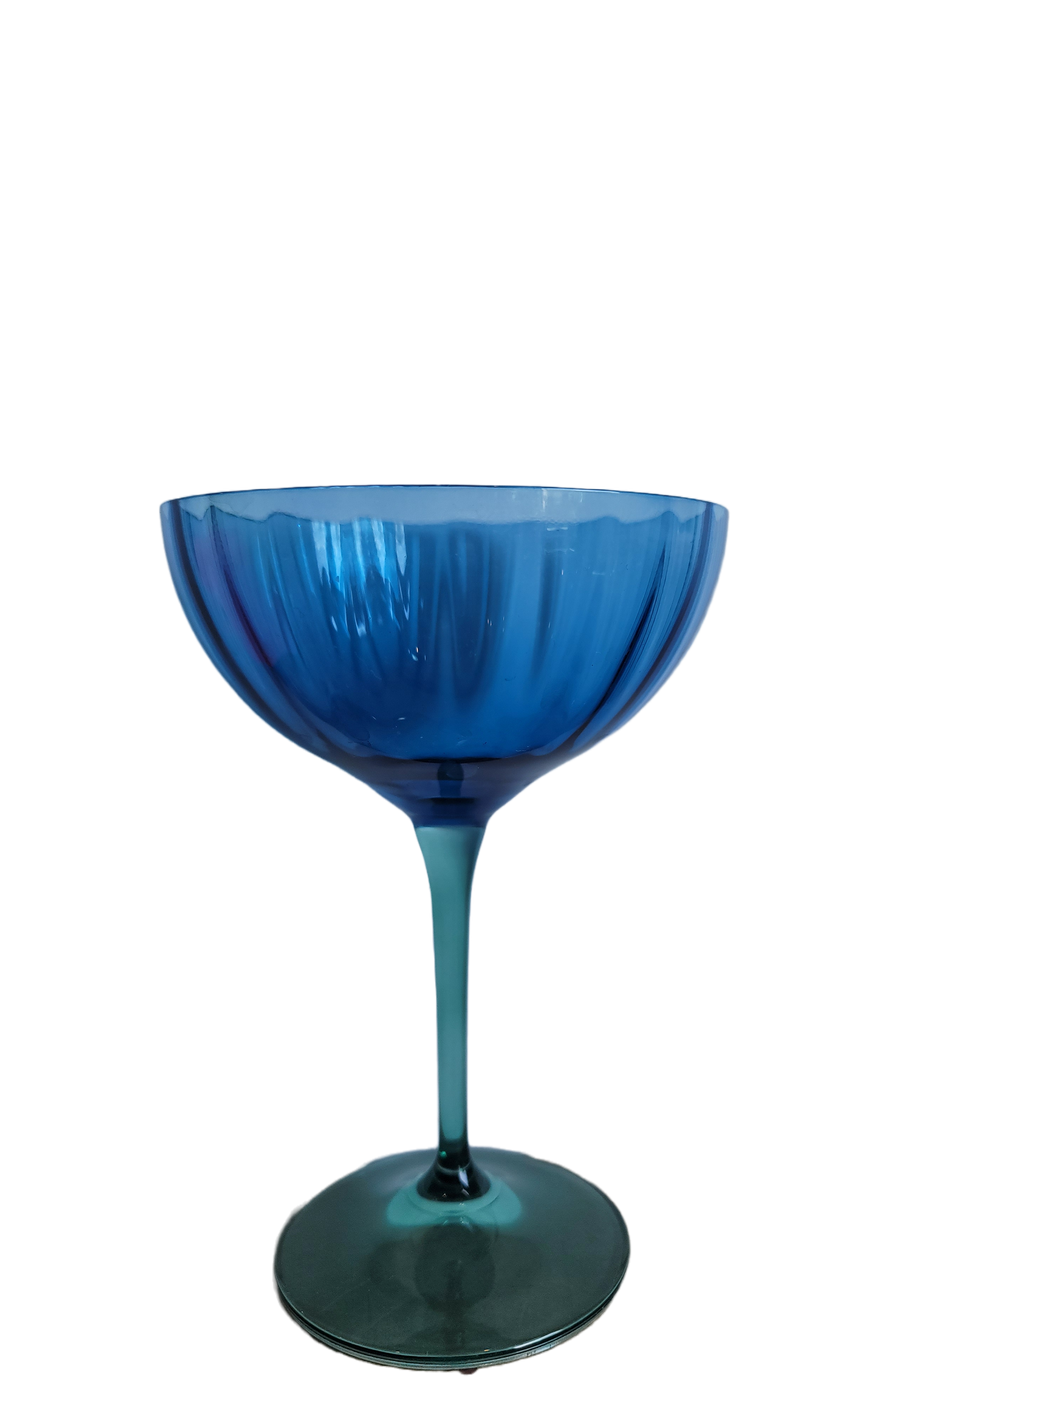 Blue Coup Glass